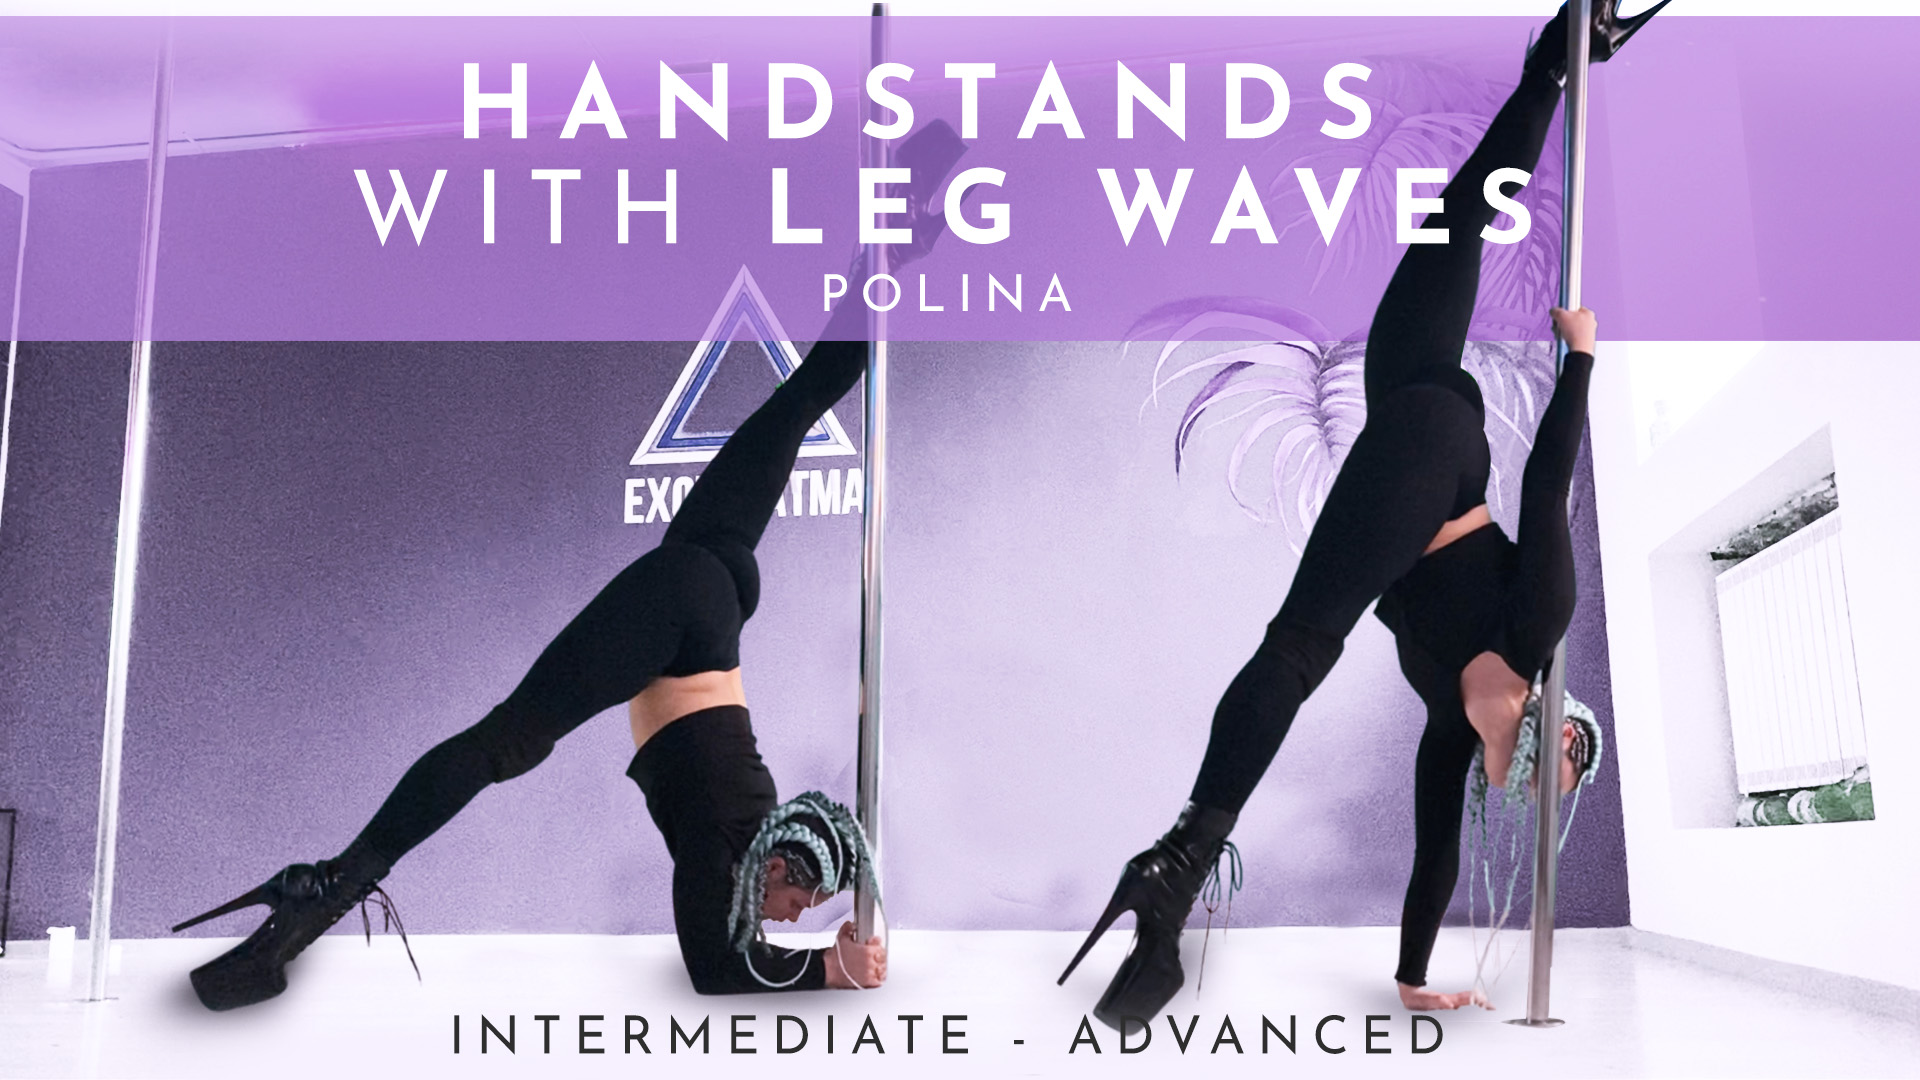 Exotic practice with Handstands and Leg waves